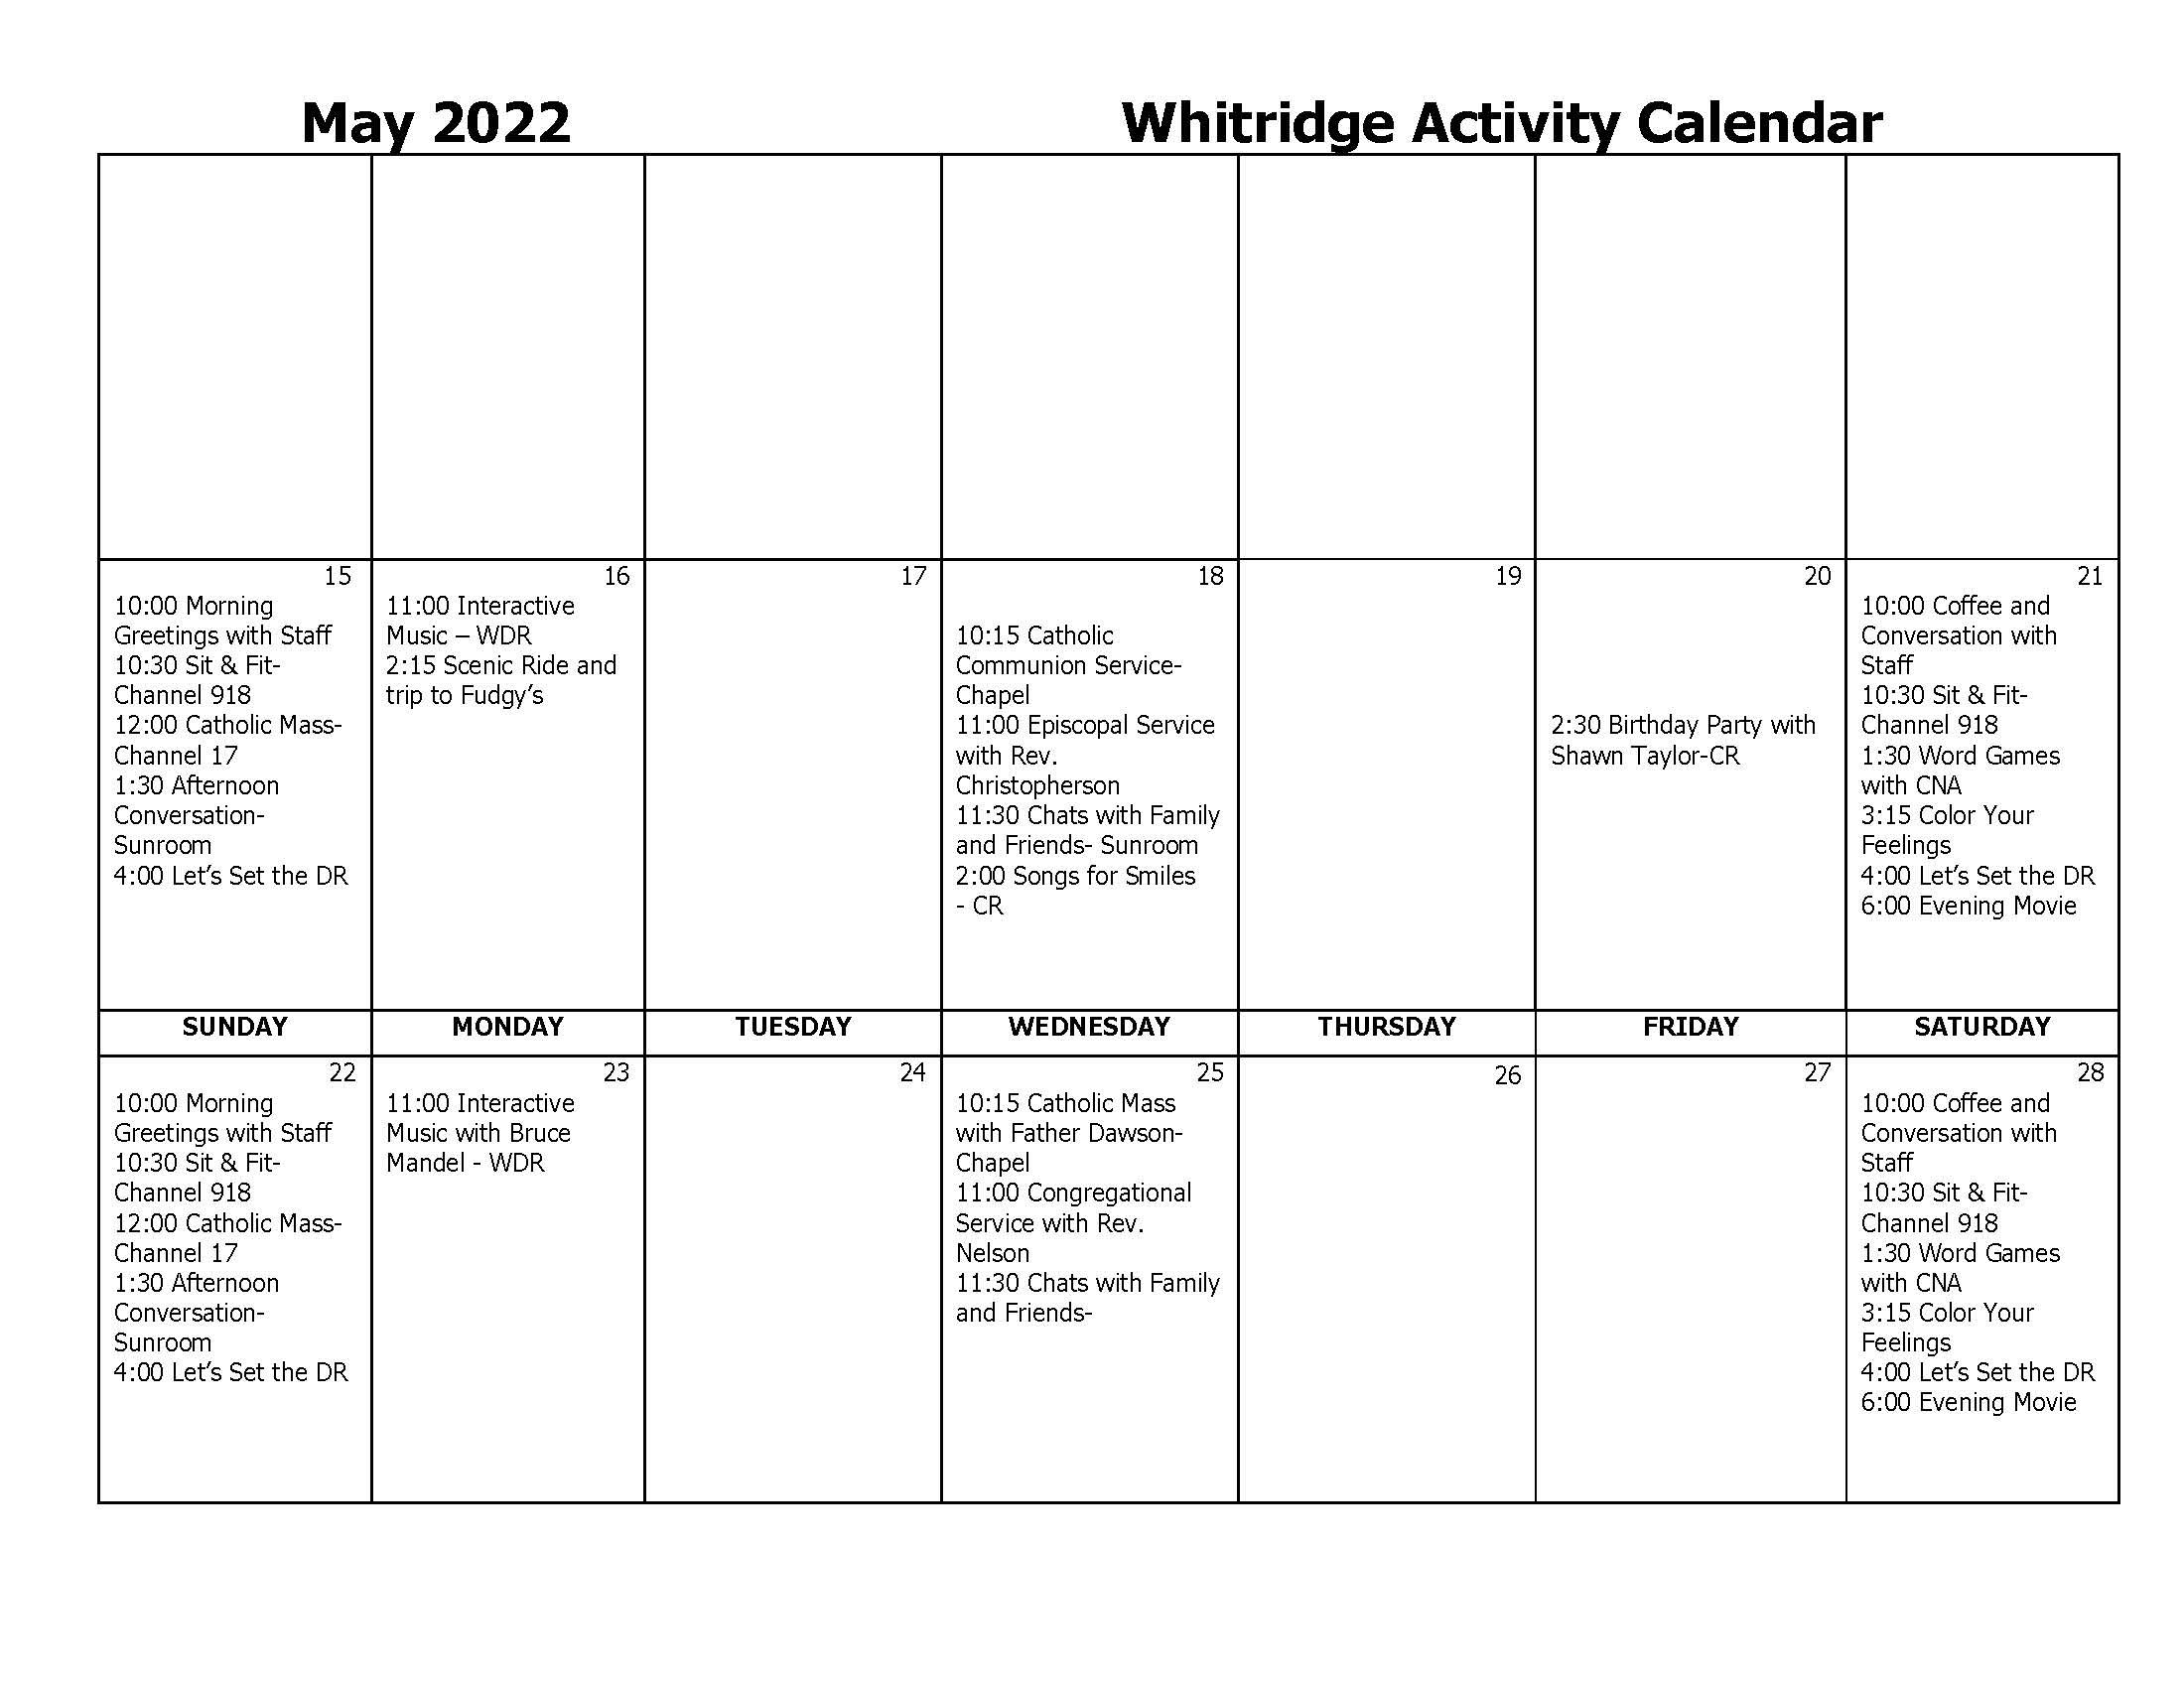 May 2022 Whit. Activity Calendar_Page_2